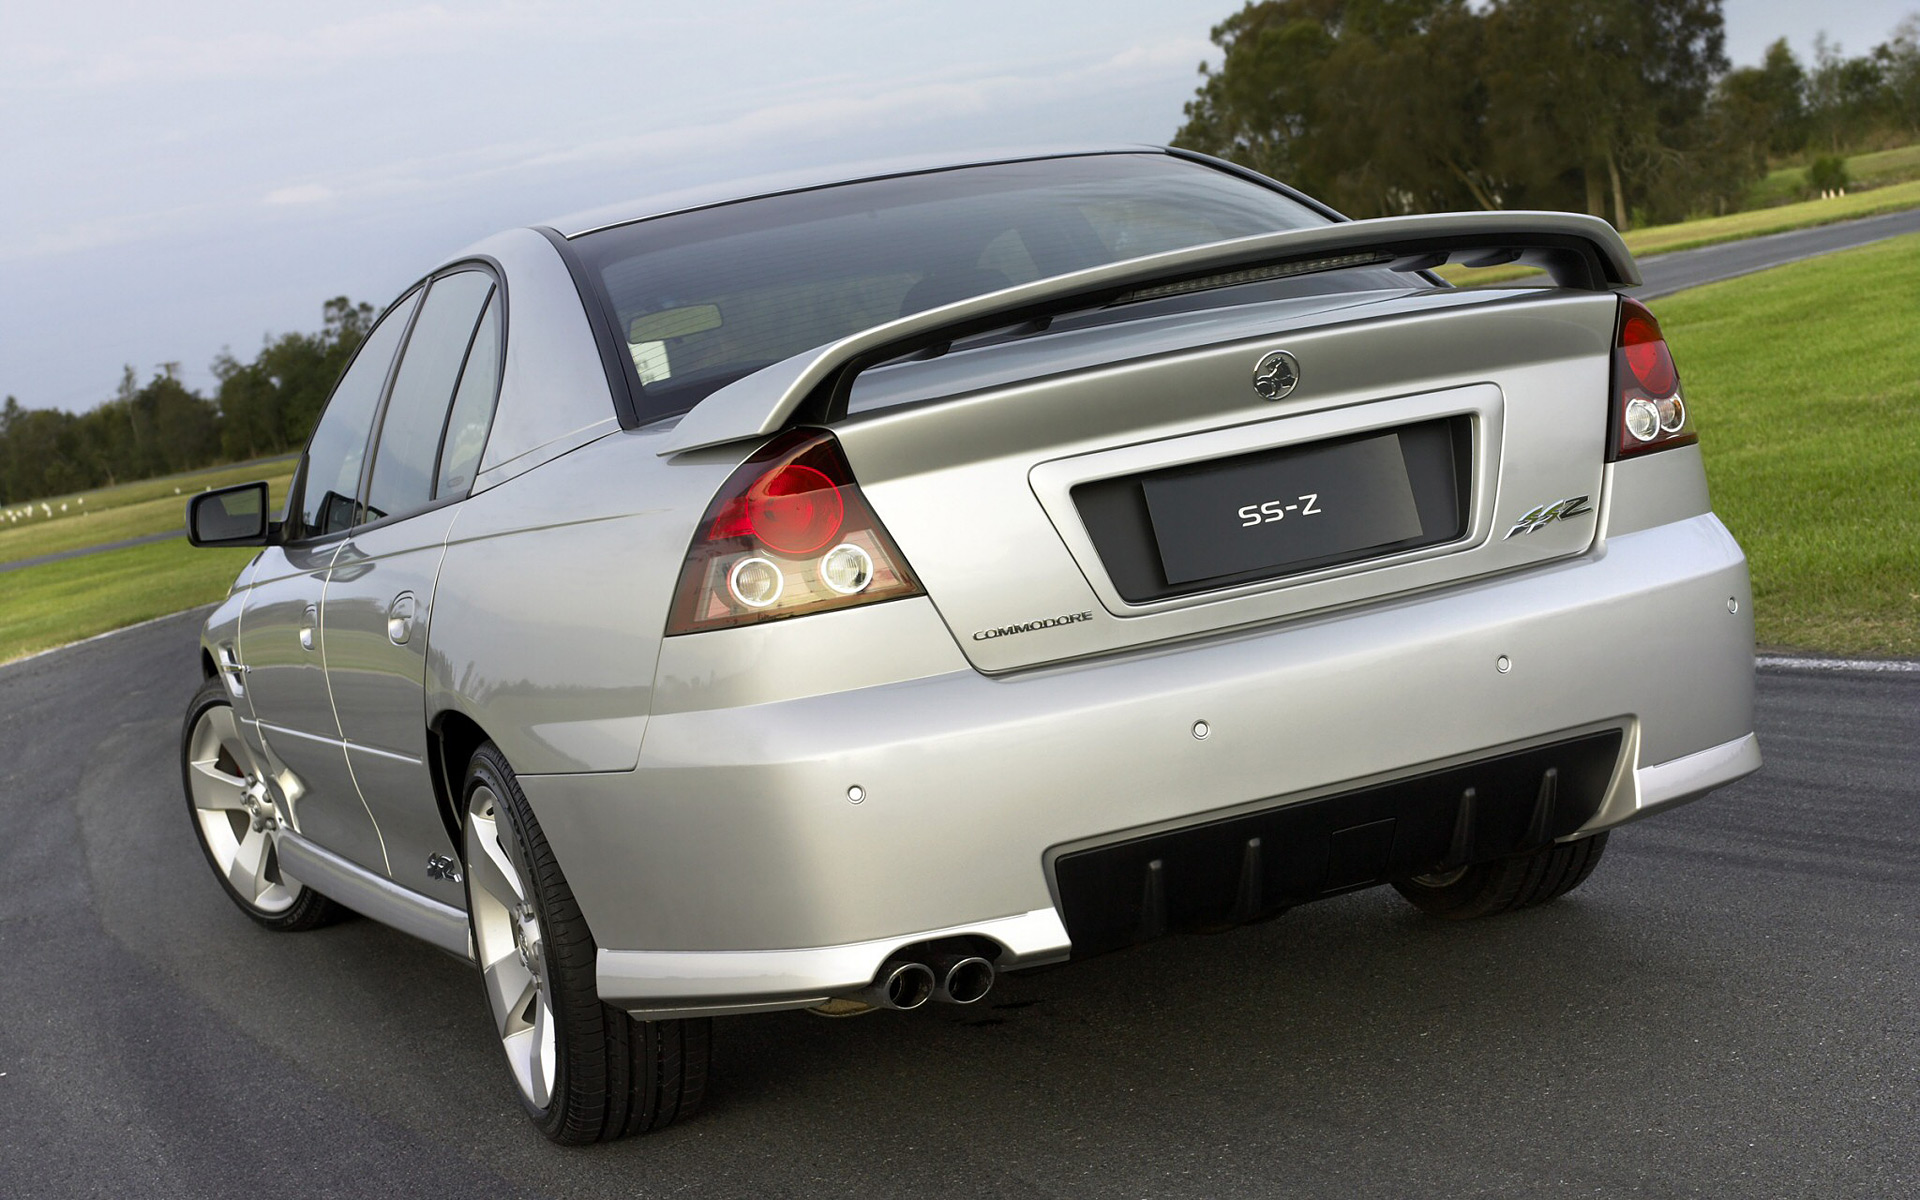  2005 Holden Commodore SS-Z Wallpaper.